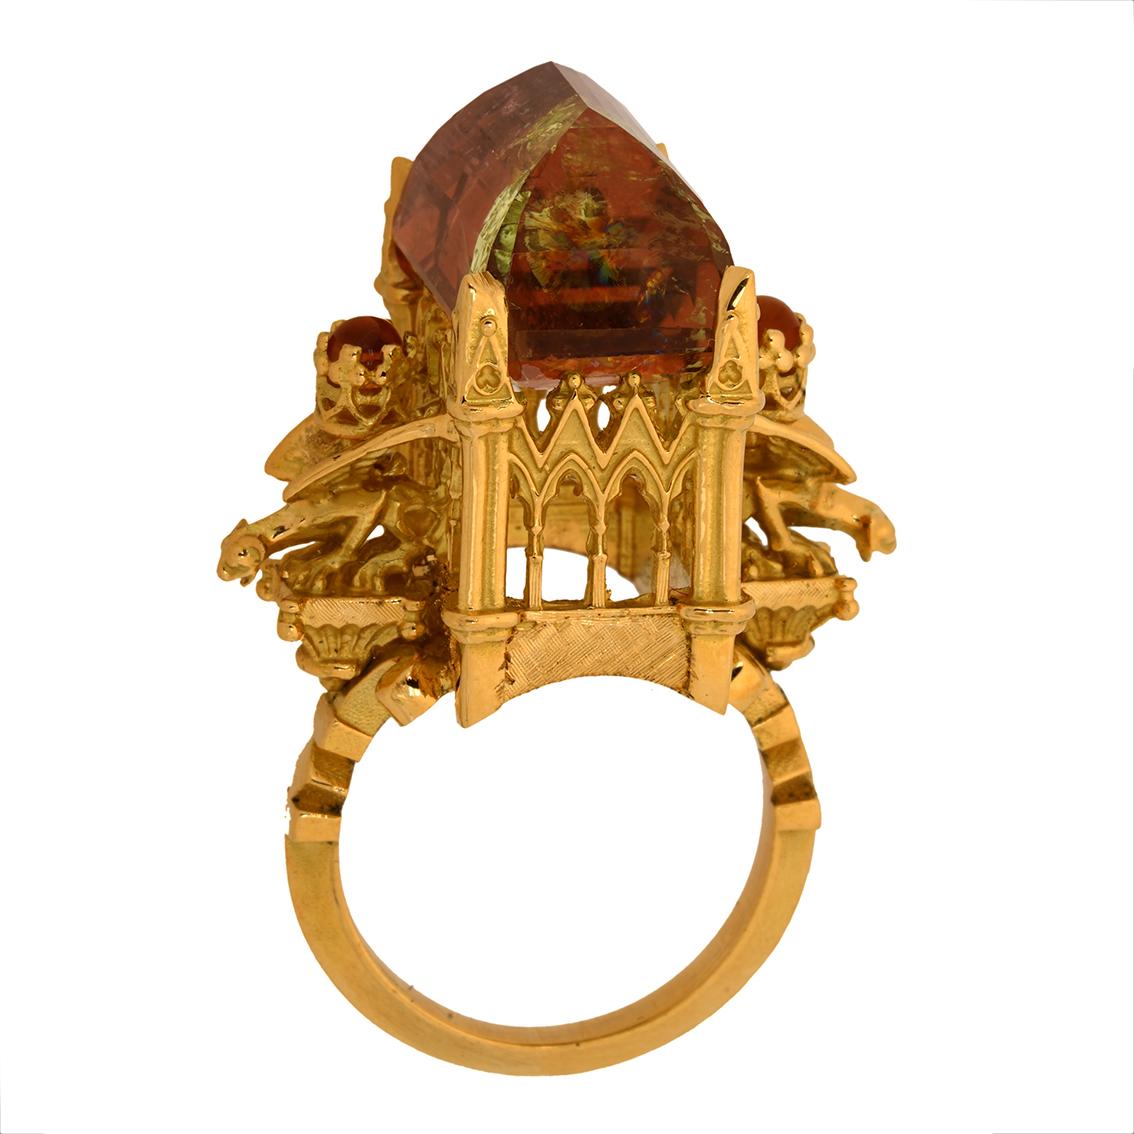 This captivating ring is a truly wondrous one of a kind piece.

Intricately handcrafted in 18kt yellow gold this glorious ring features a mesmerizing rich amber and green bi colour tourmaline resplendent atop a signature William Llewellyn Griffiths